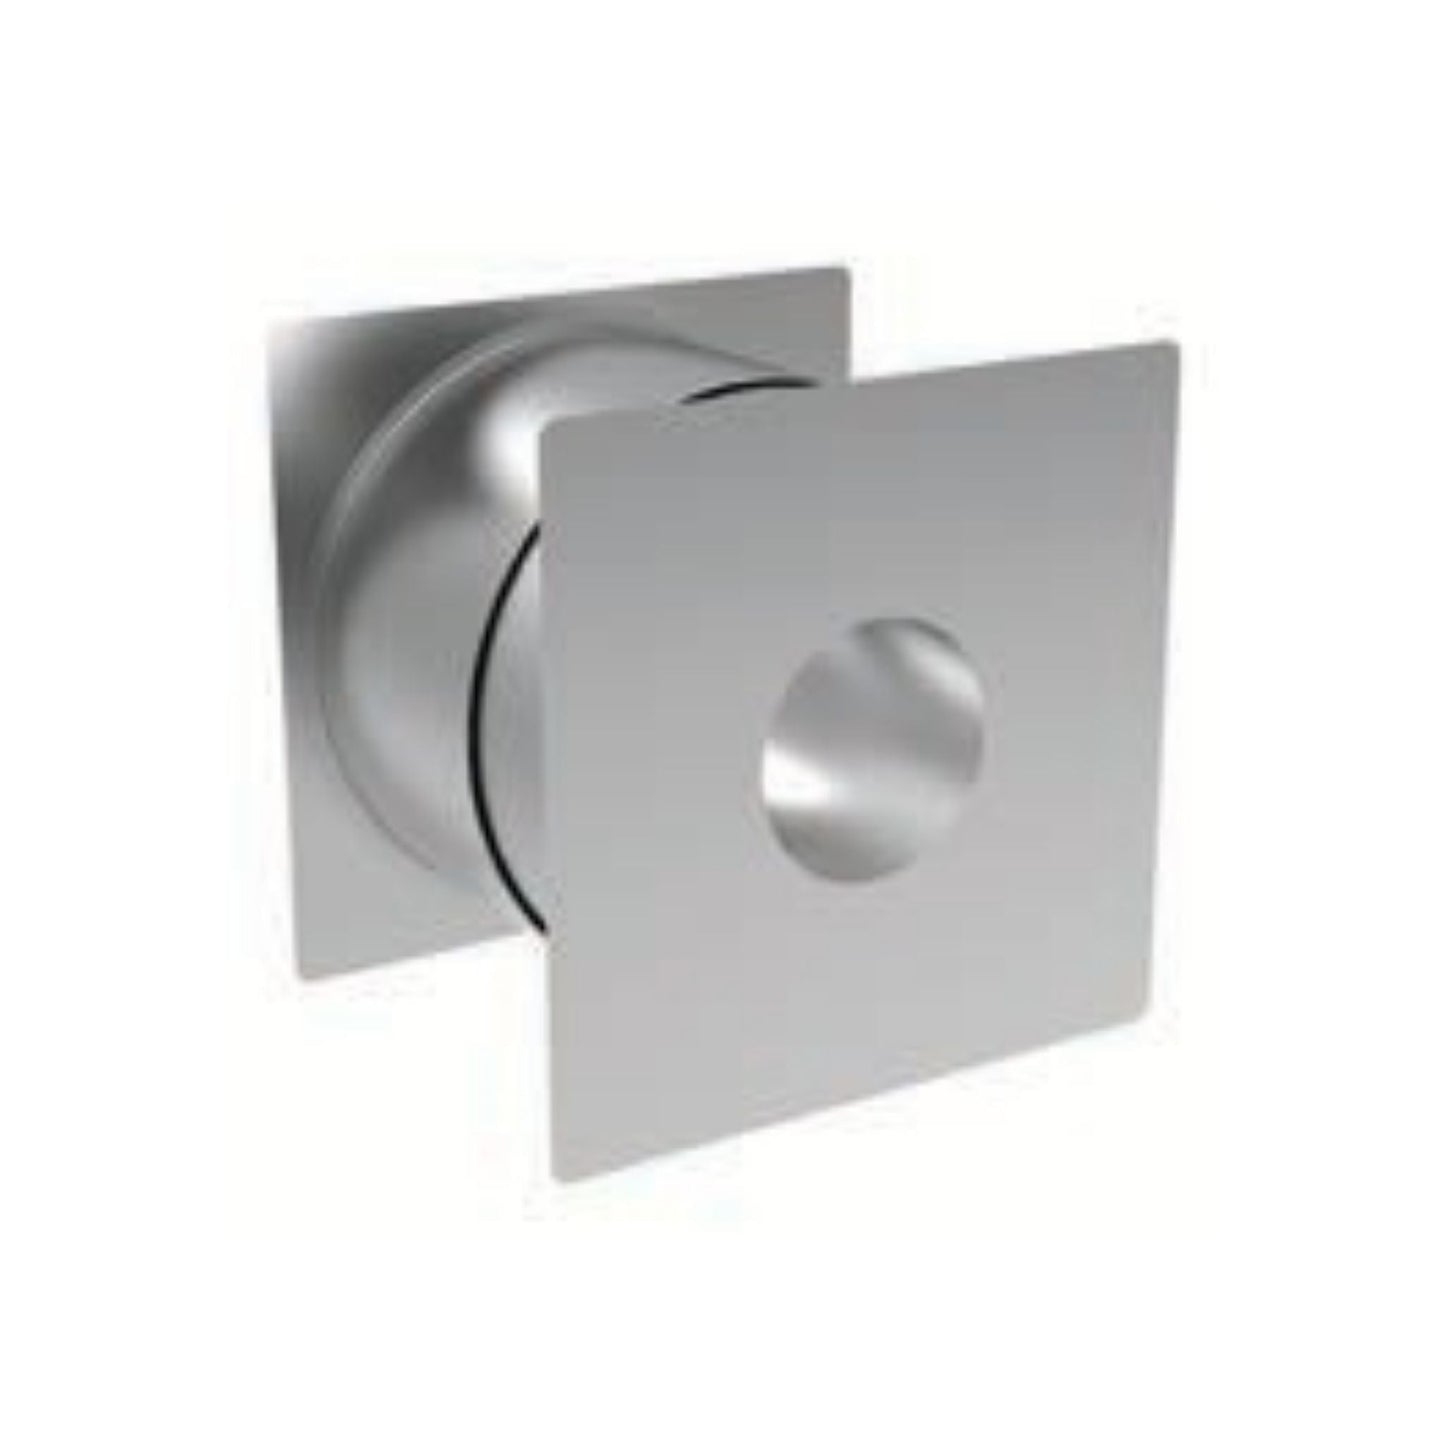 DuraVent FasNSeal 3" 29-4C Stainless Steel Insulated Wall Pass Through